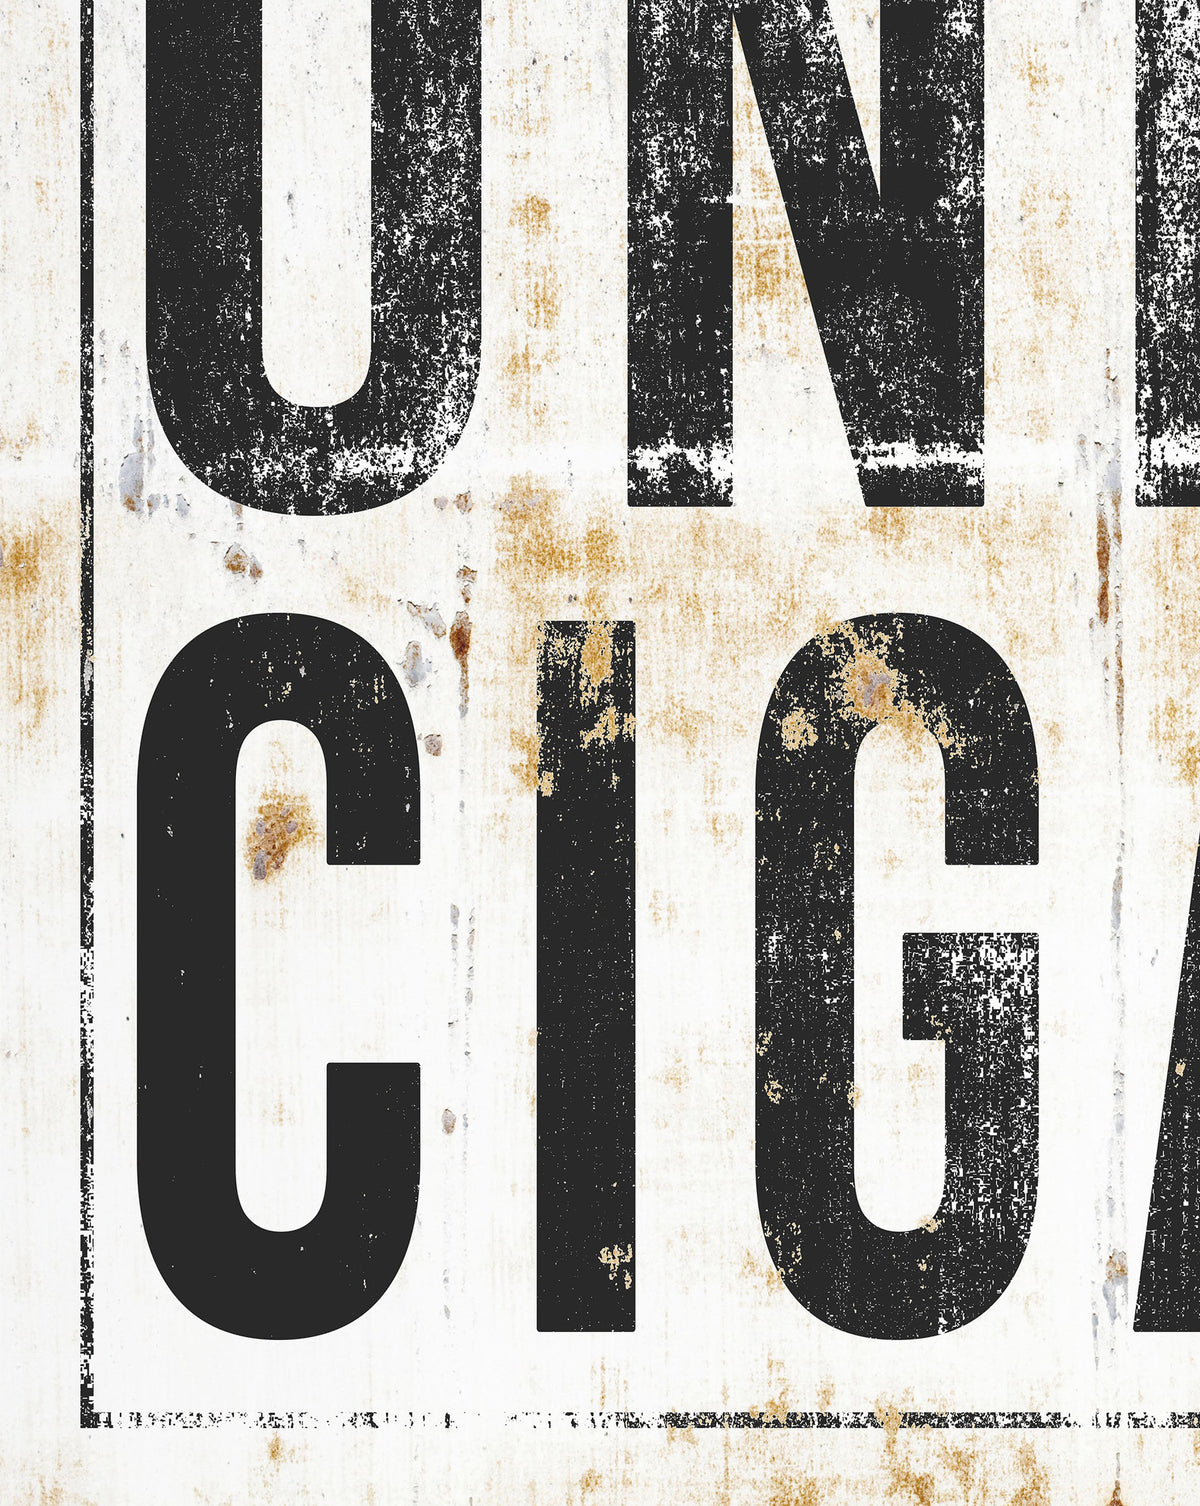 Cigar Bar & Lounge Sign for a Speakeasy Decor or Smoking Room Poster Print